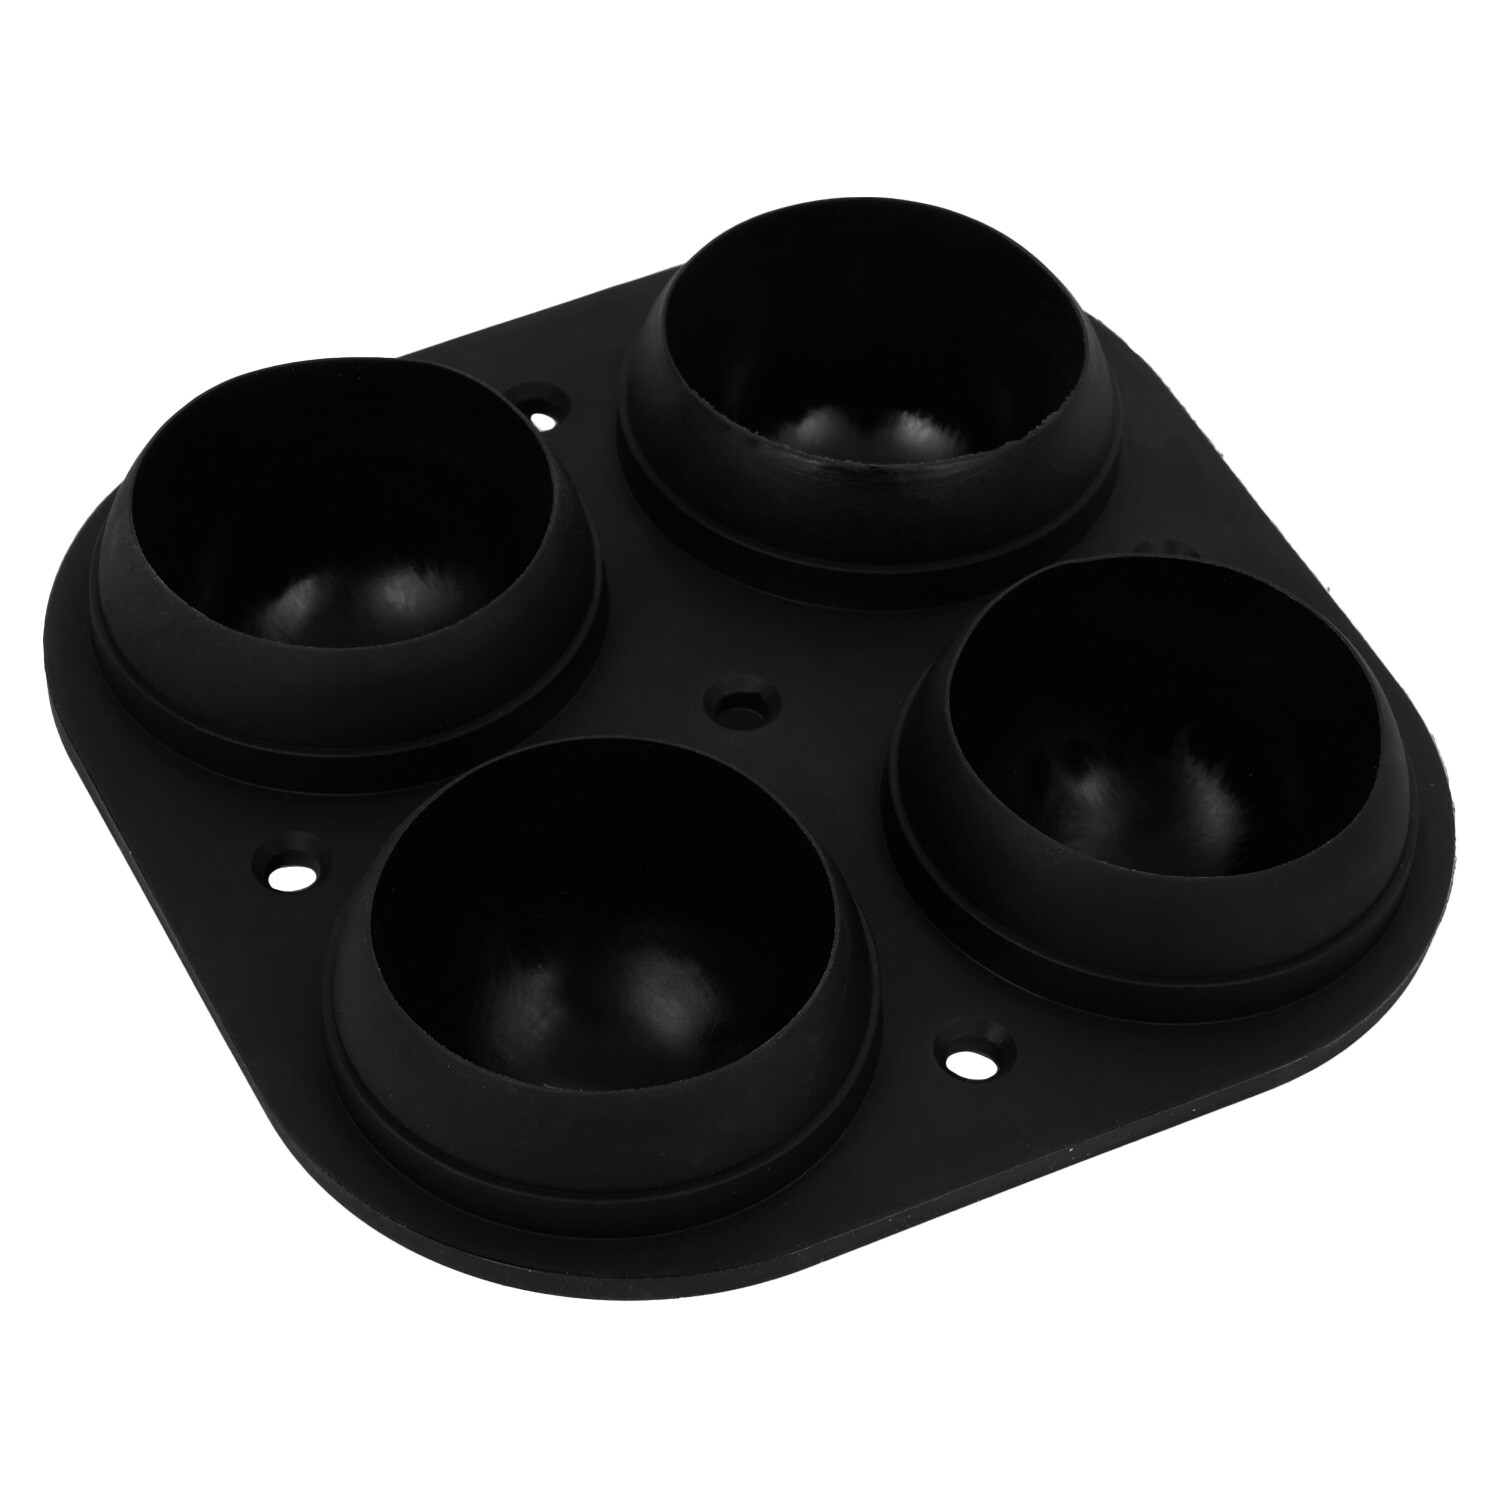 4-Ball Silicone Ice Mould - Black Image 4